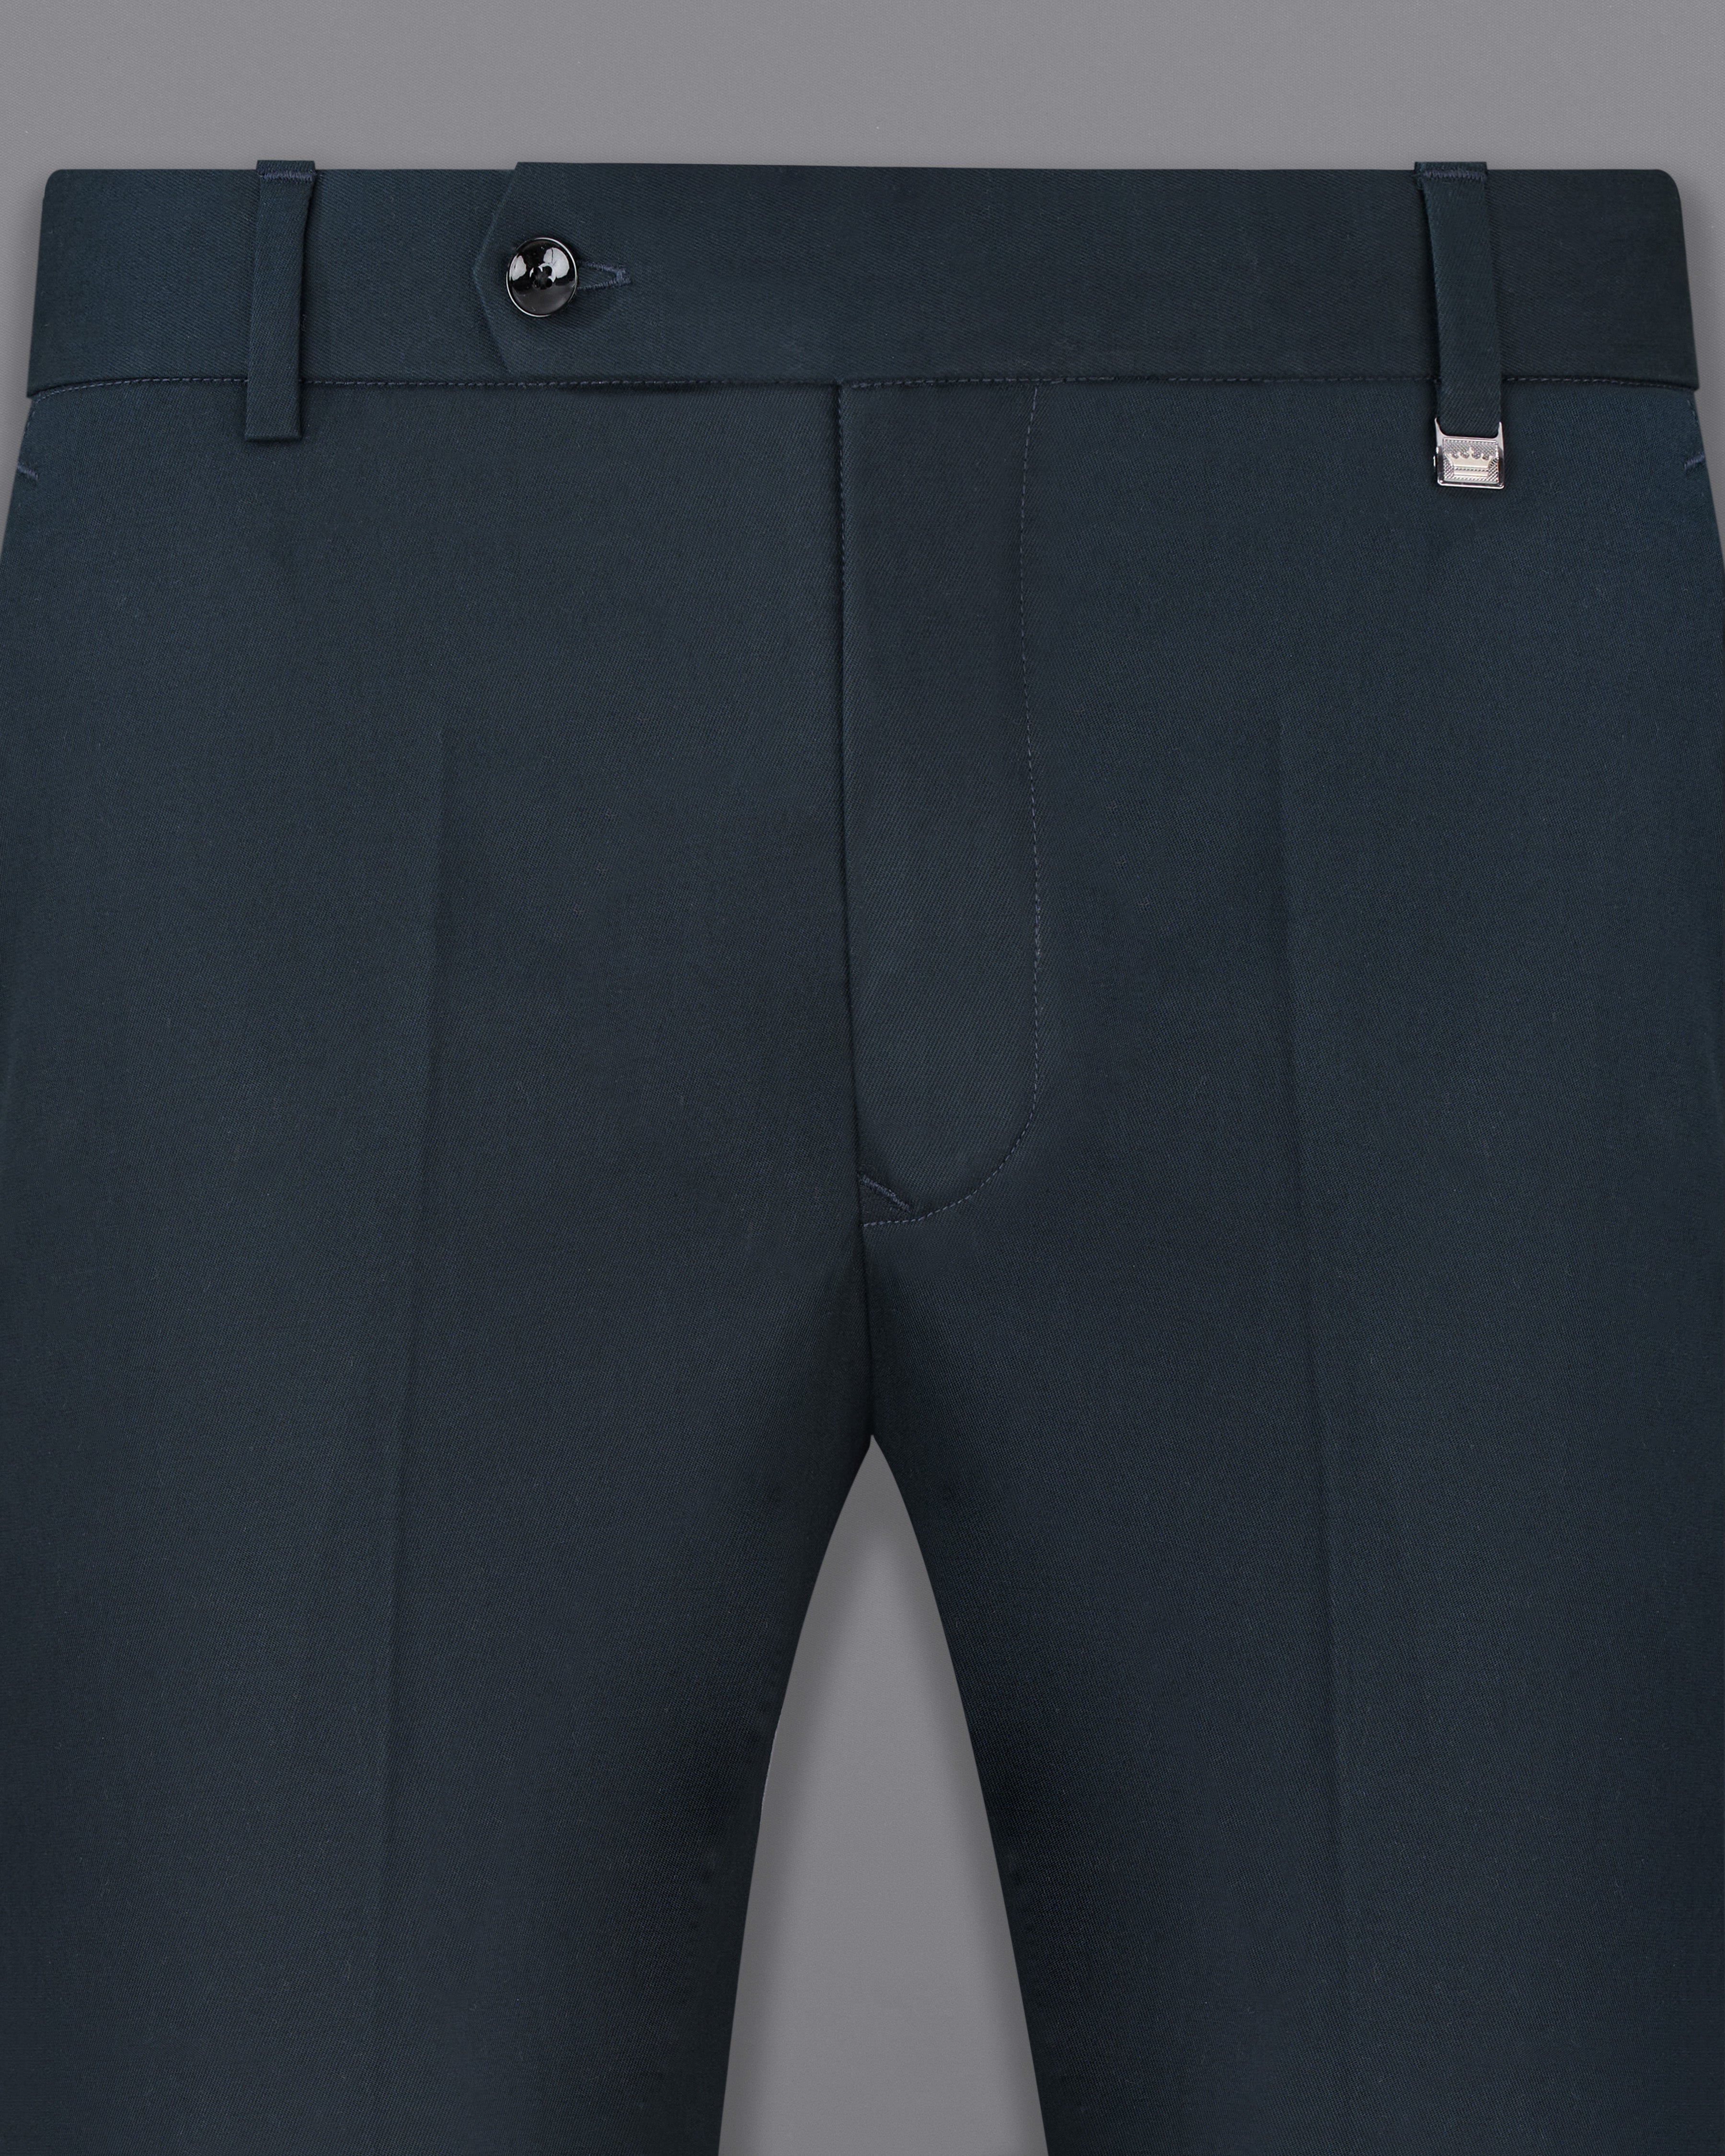 Jeans & Trousers | H&M High Waist Trouser | Waist 30-32 | Length 40|  Stretchable | Freeup